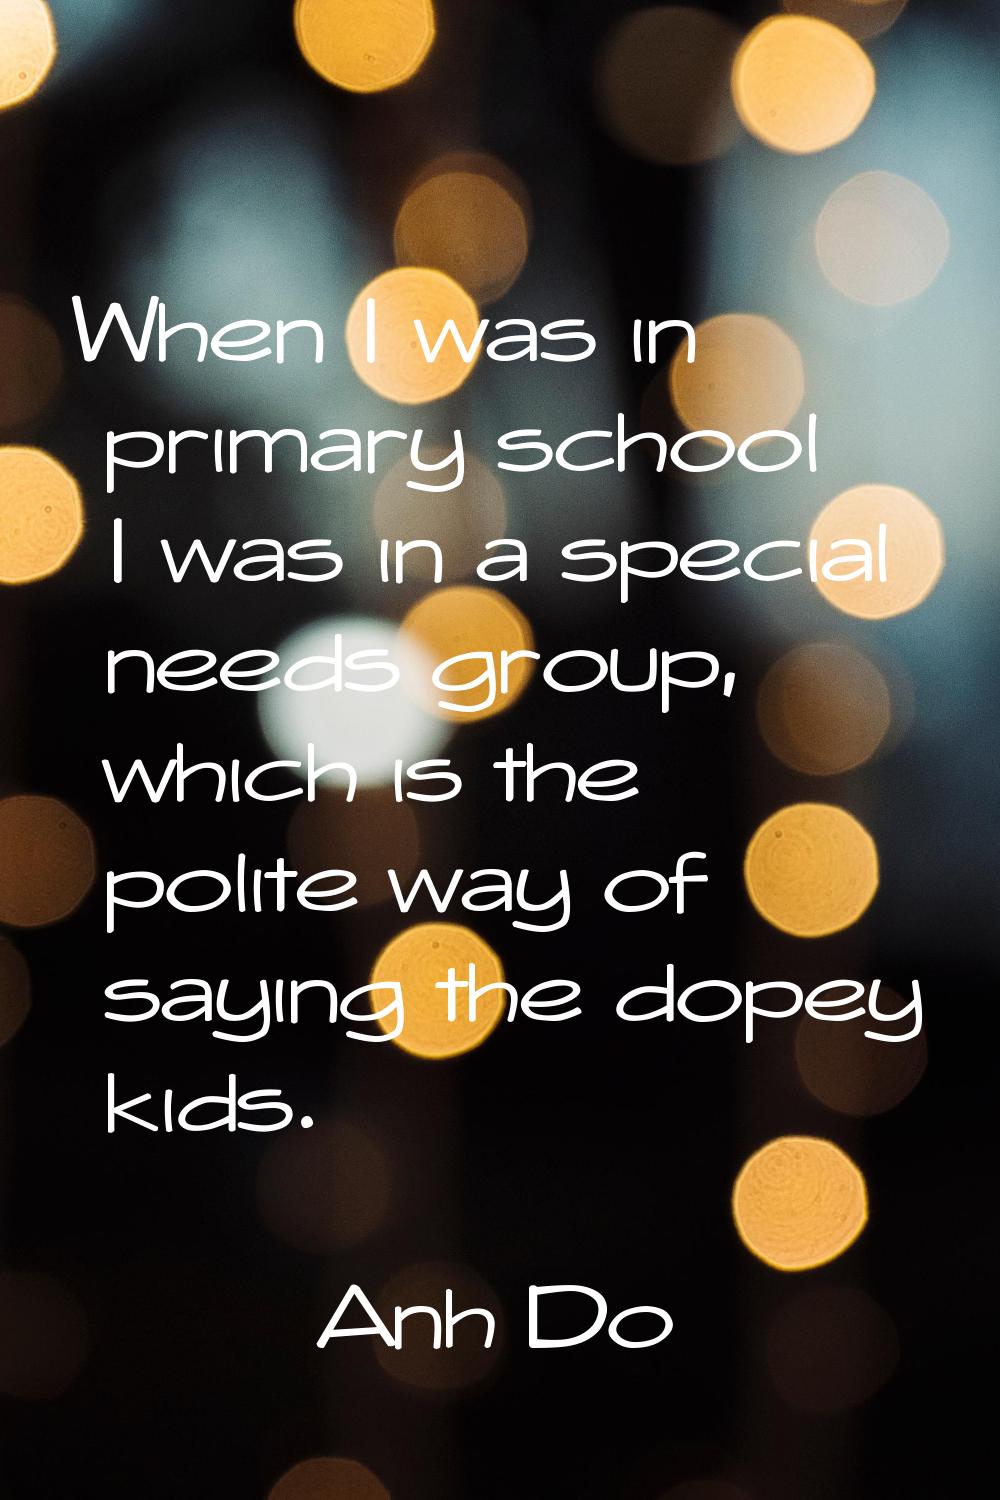 When I was in primary school I was in a special needs group, which is the polite way of saying the 